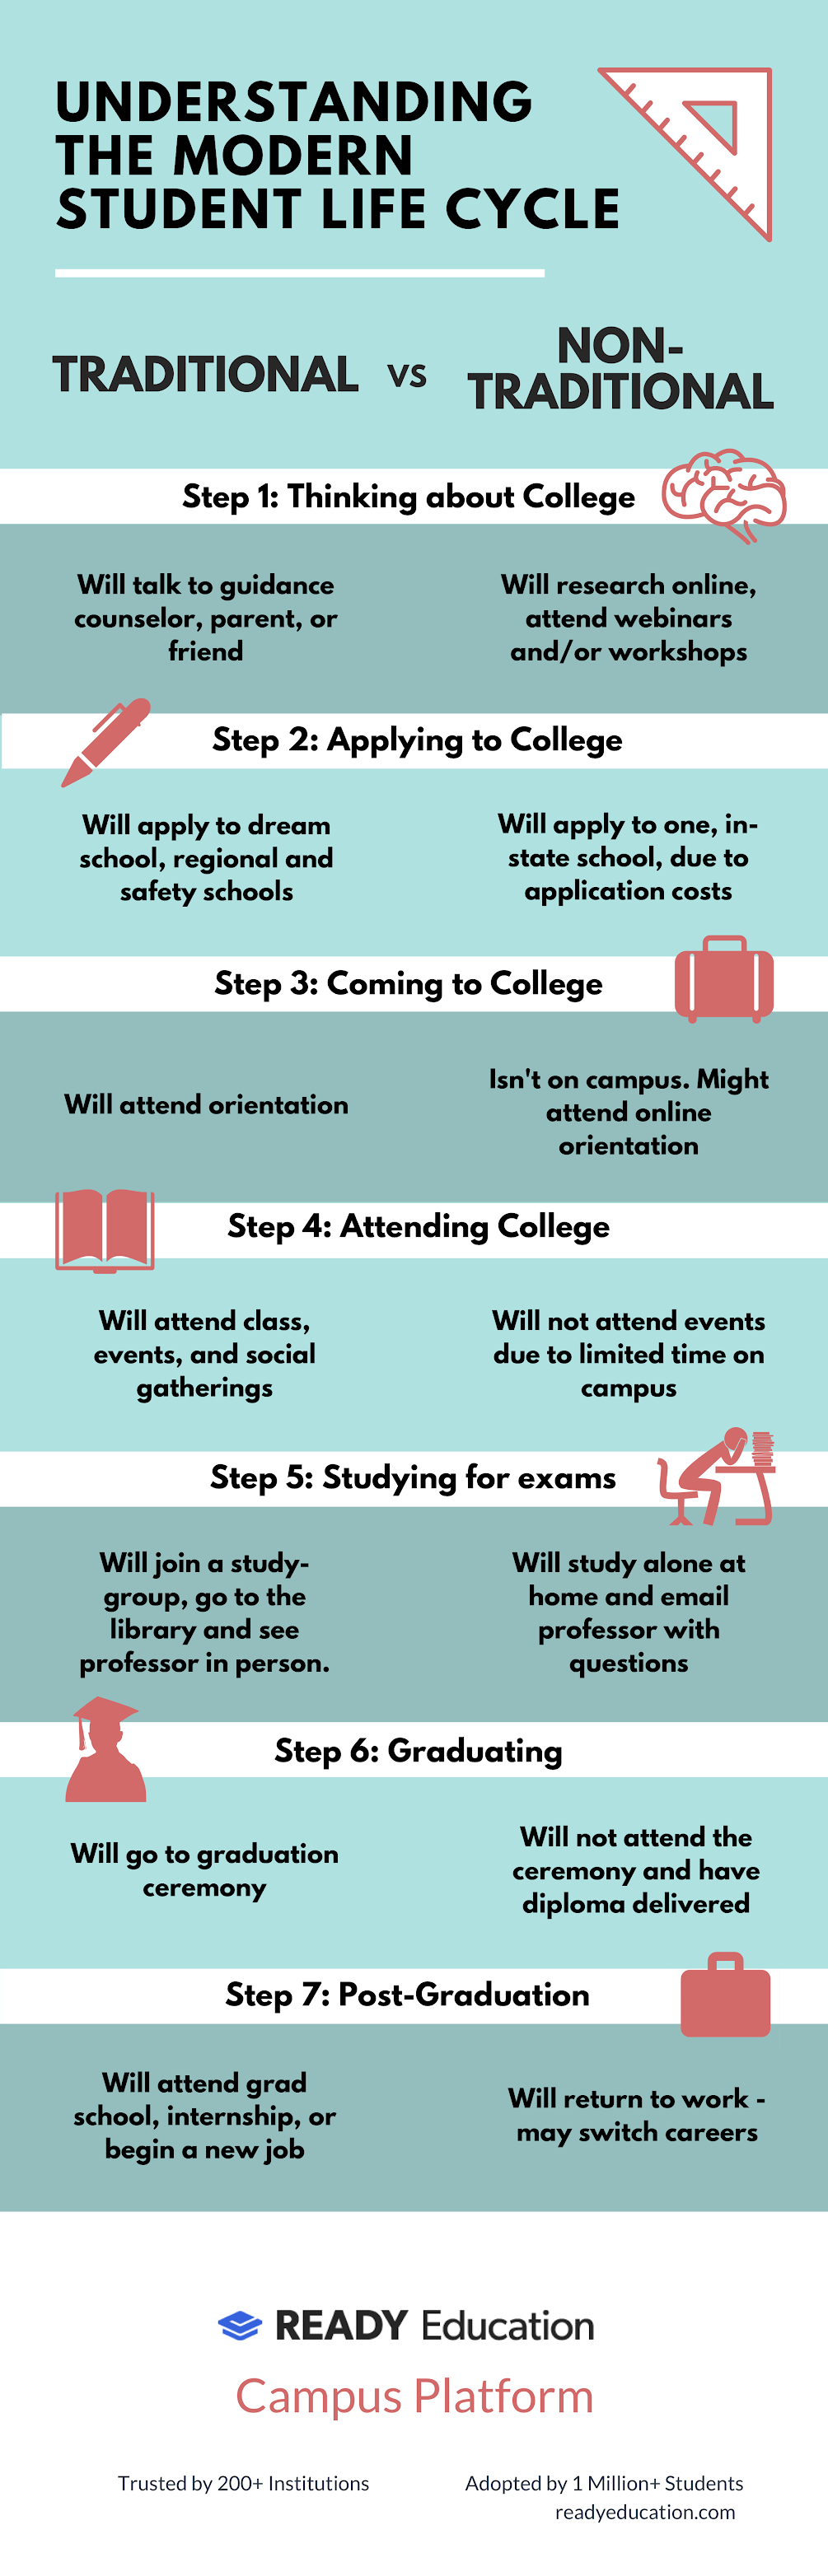 Understanding the Modern Student Life Cycle #infographic